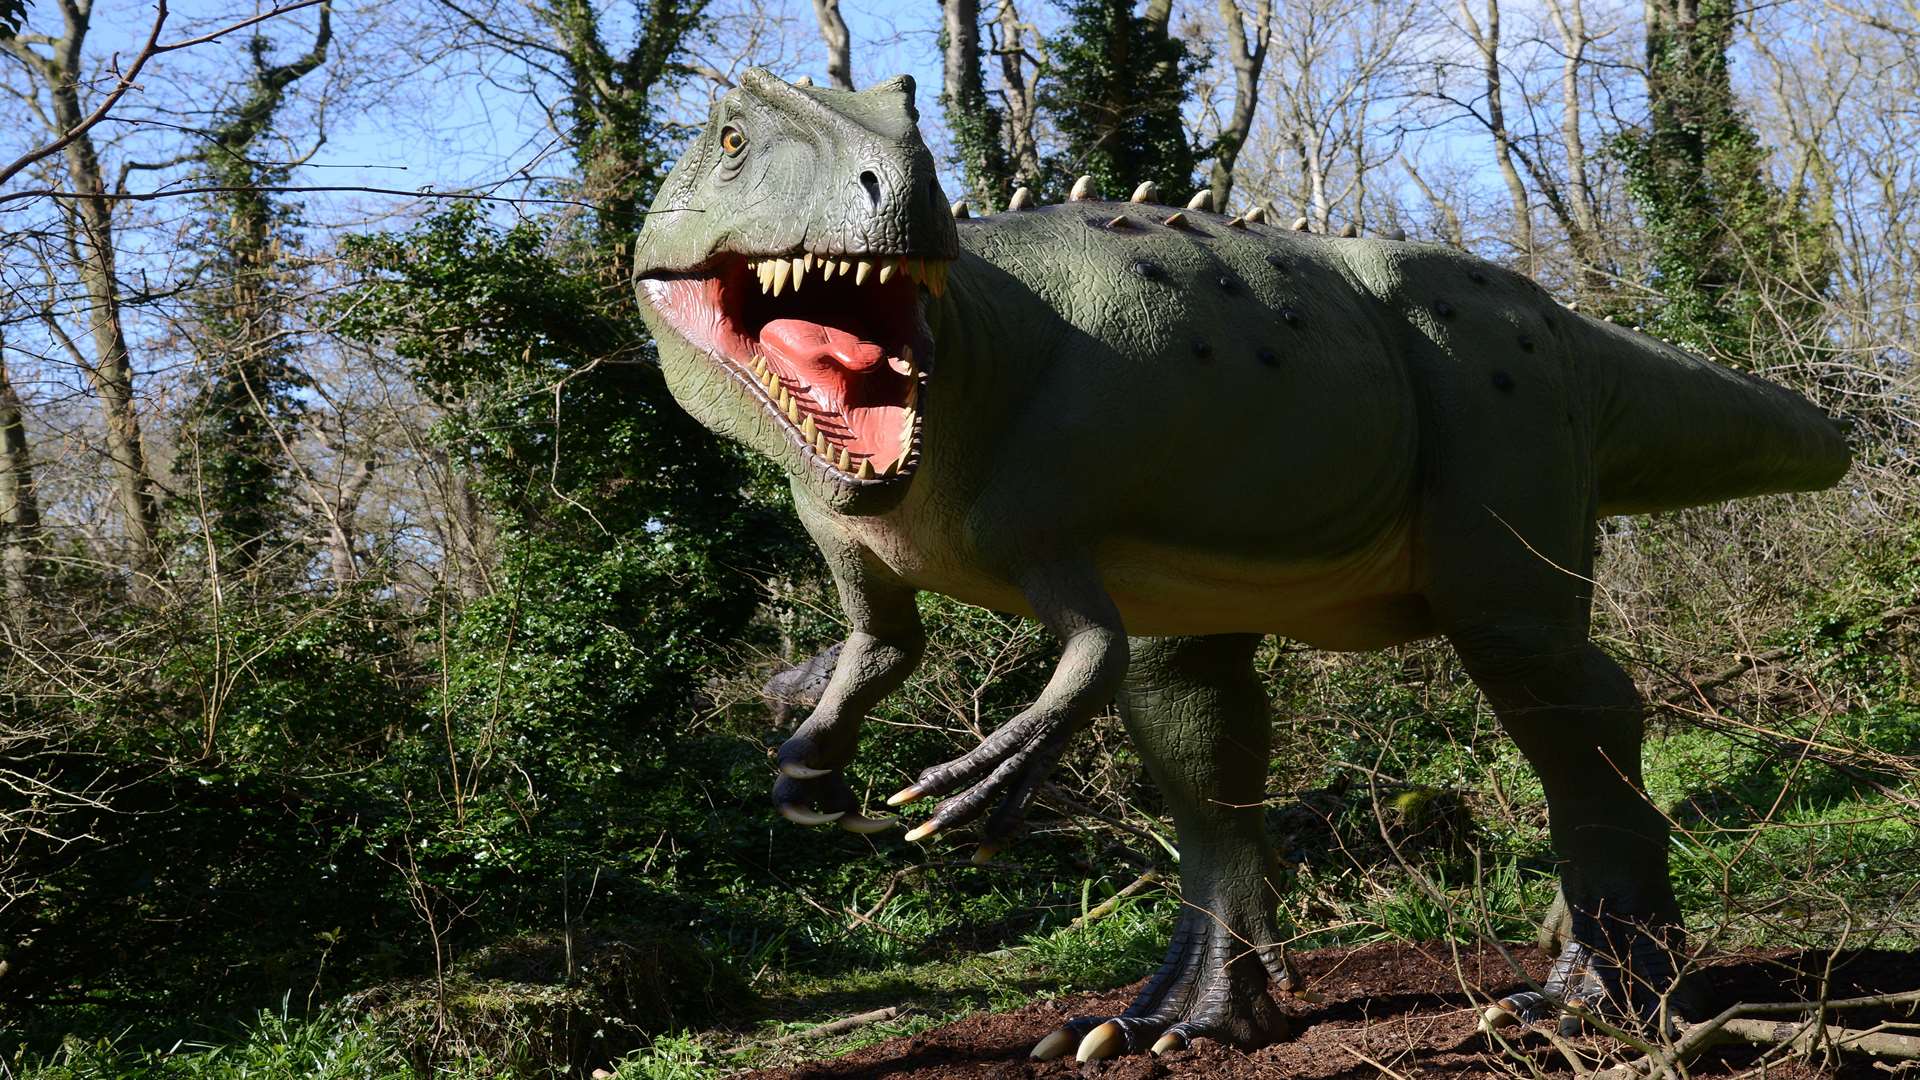 The Dinosaur Forest at Port Lympne Reserve